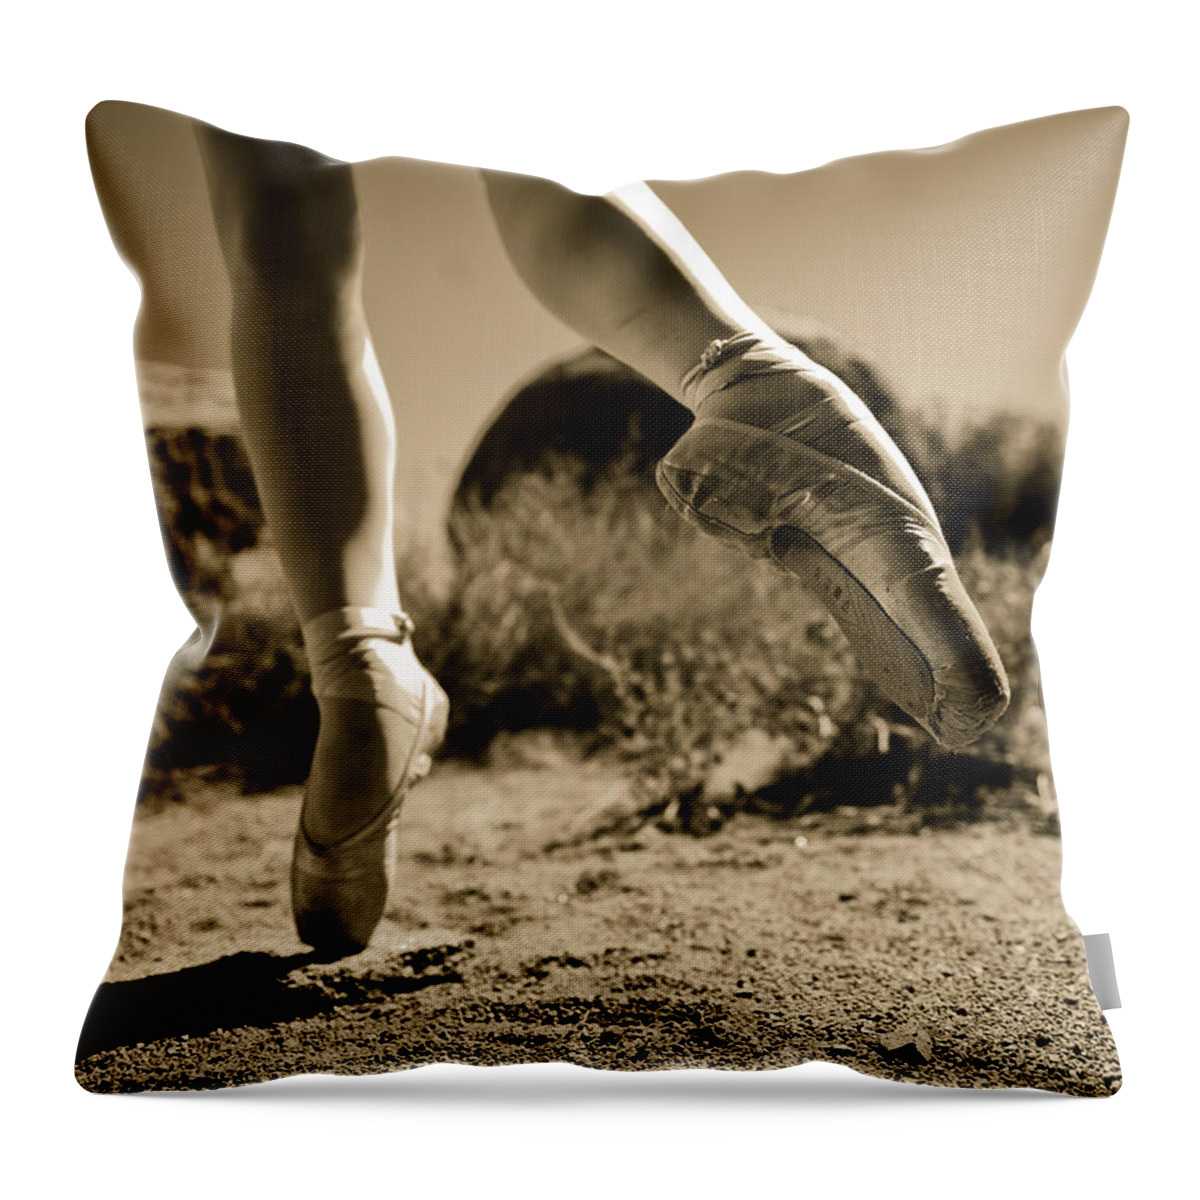 Pointe Shoes Throw Pillow featuring the photograph Ballet Pointe by Scott Sawyer